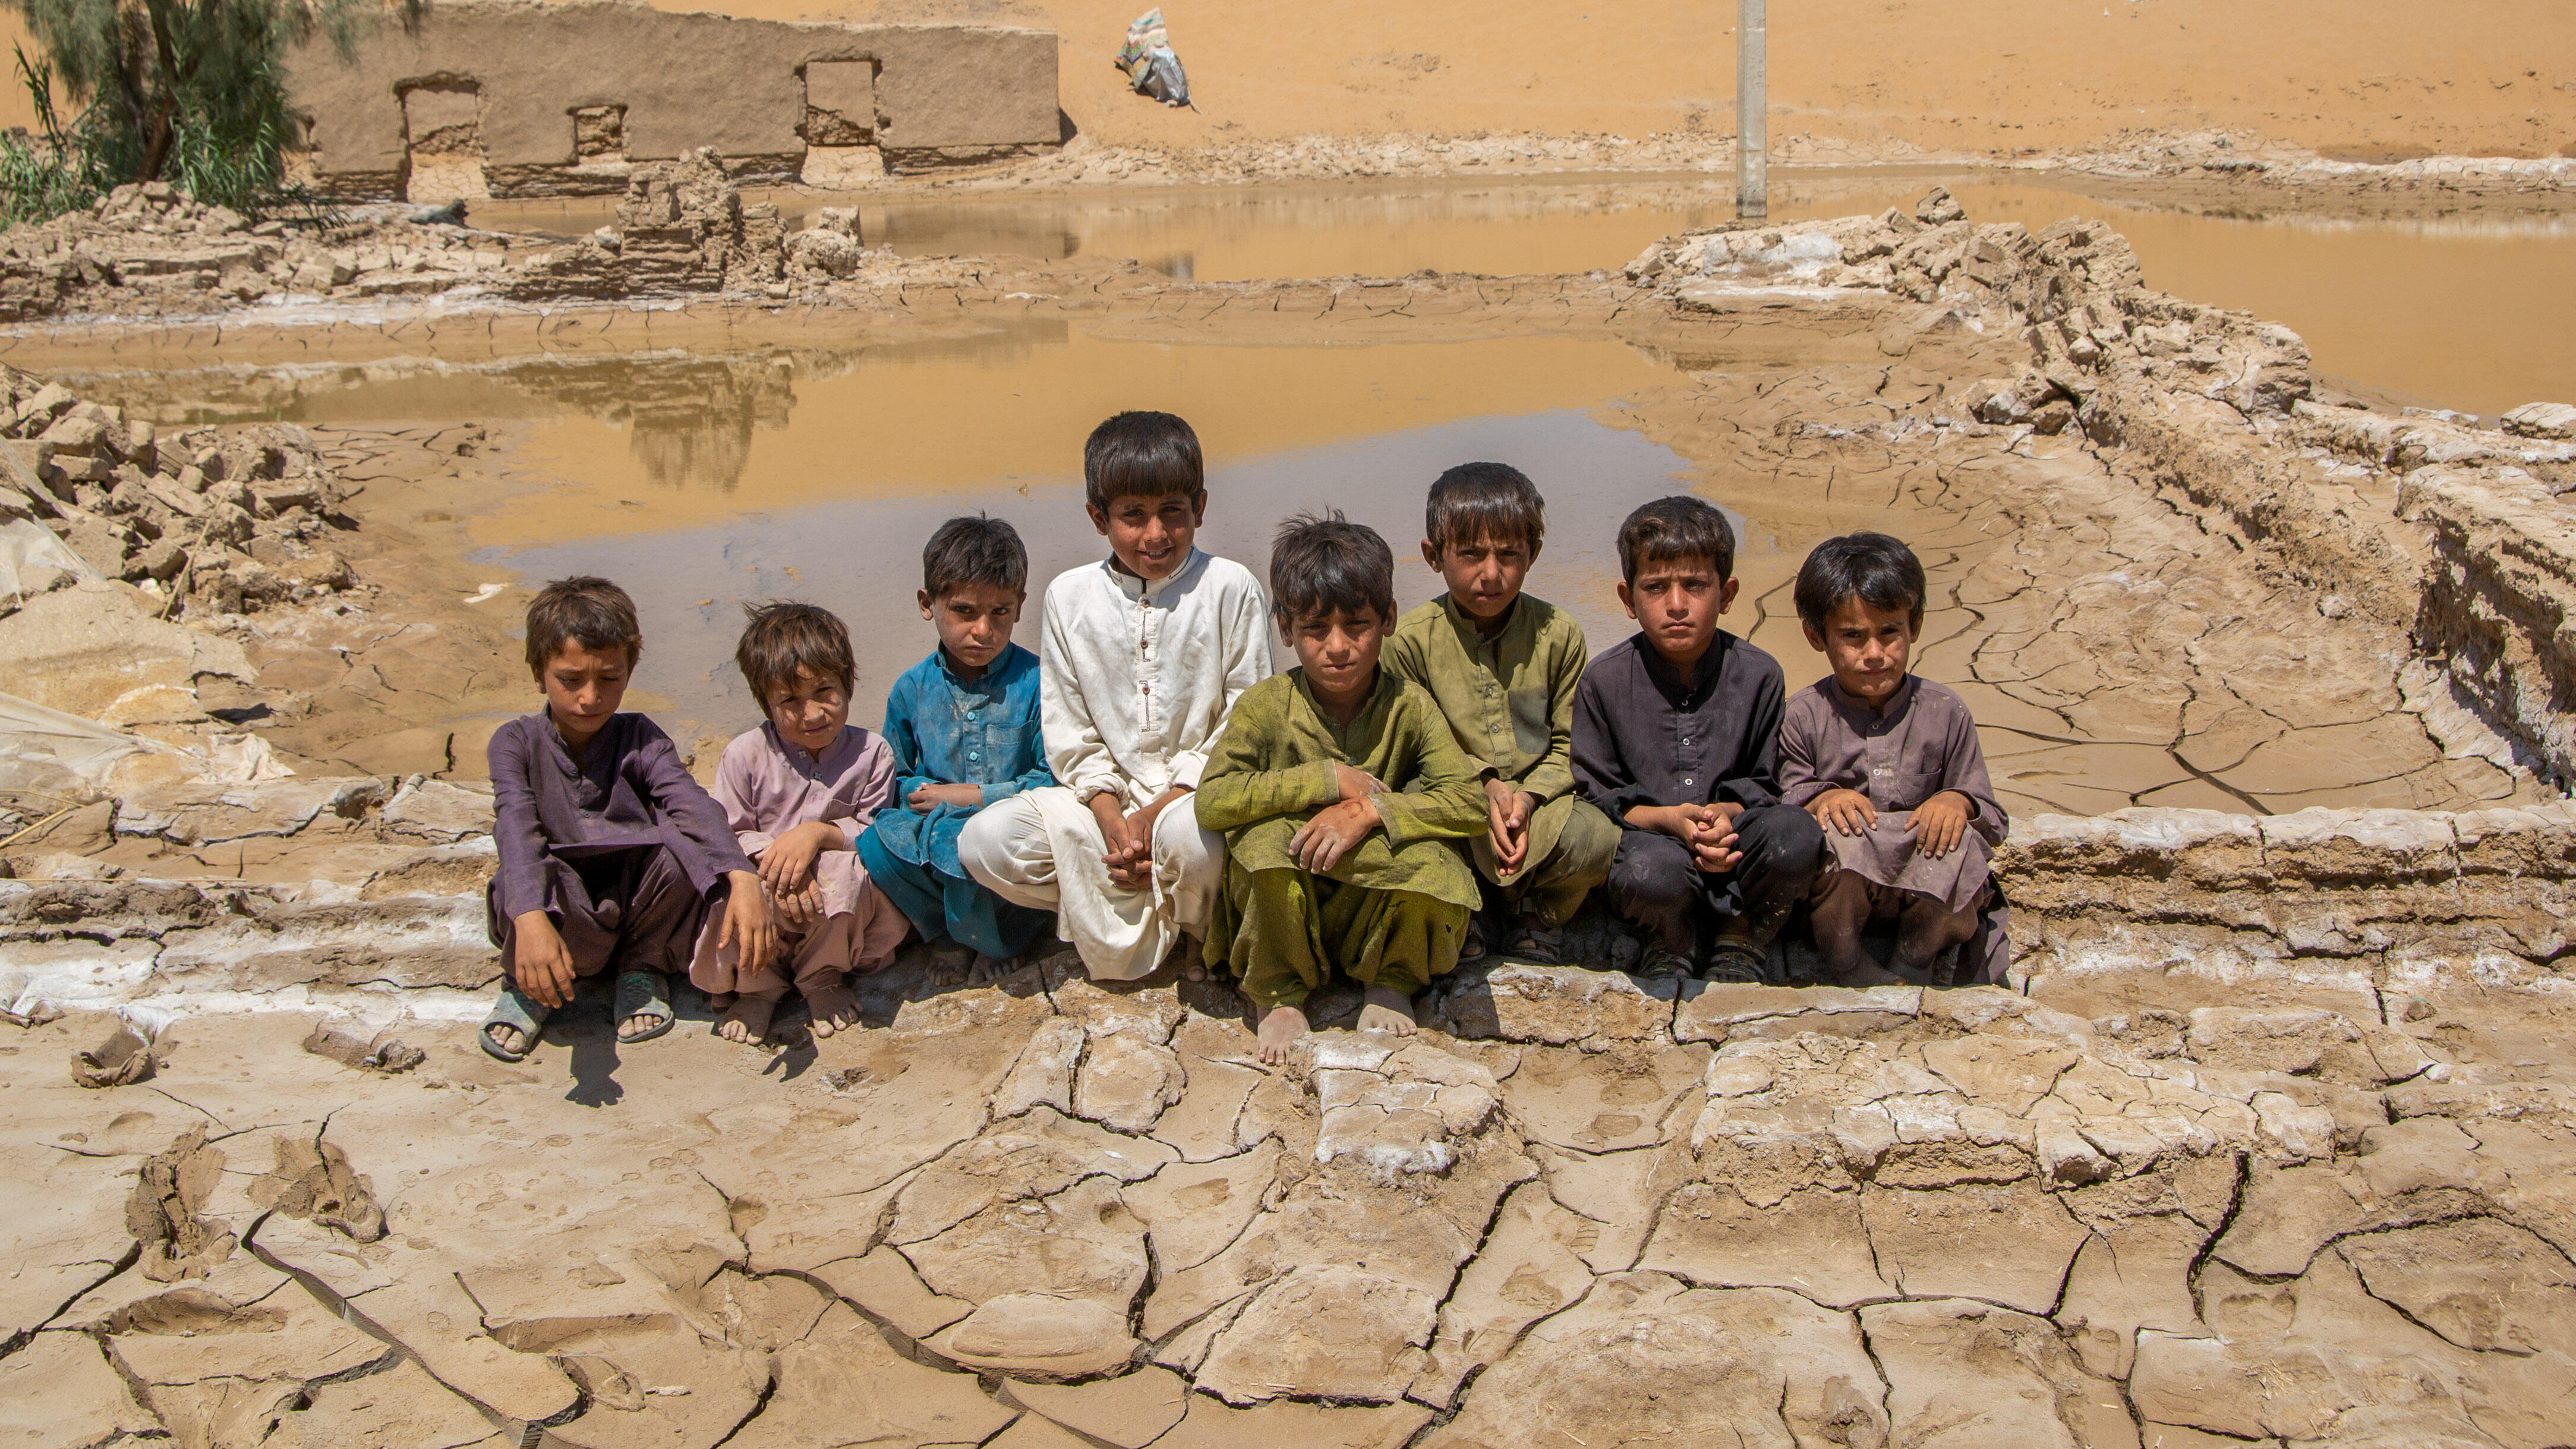 A group of boys sit together in Pakistan